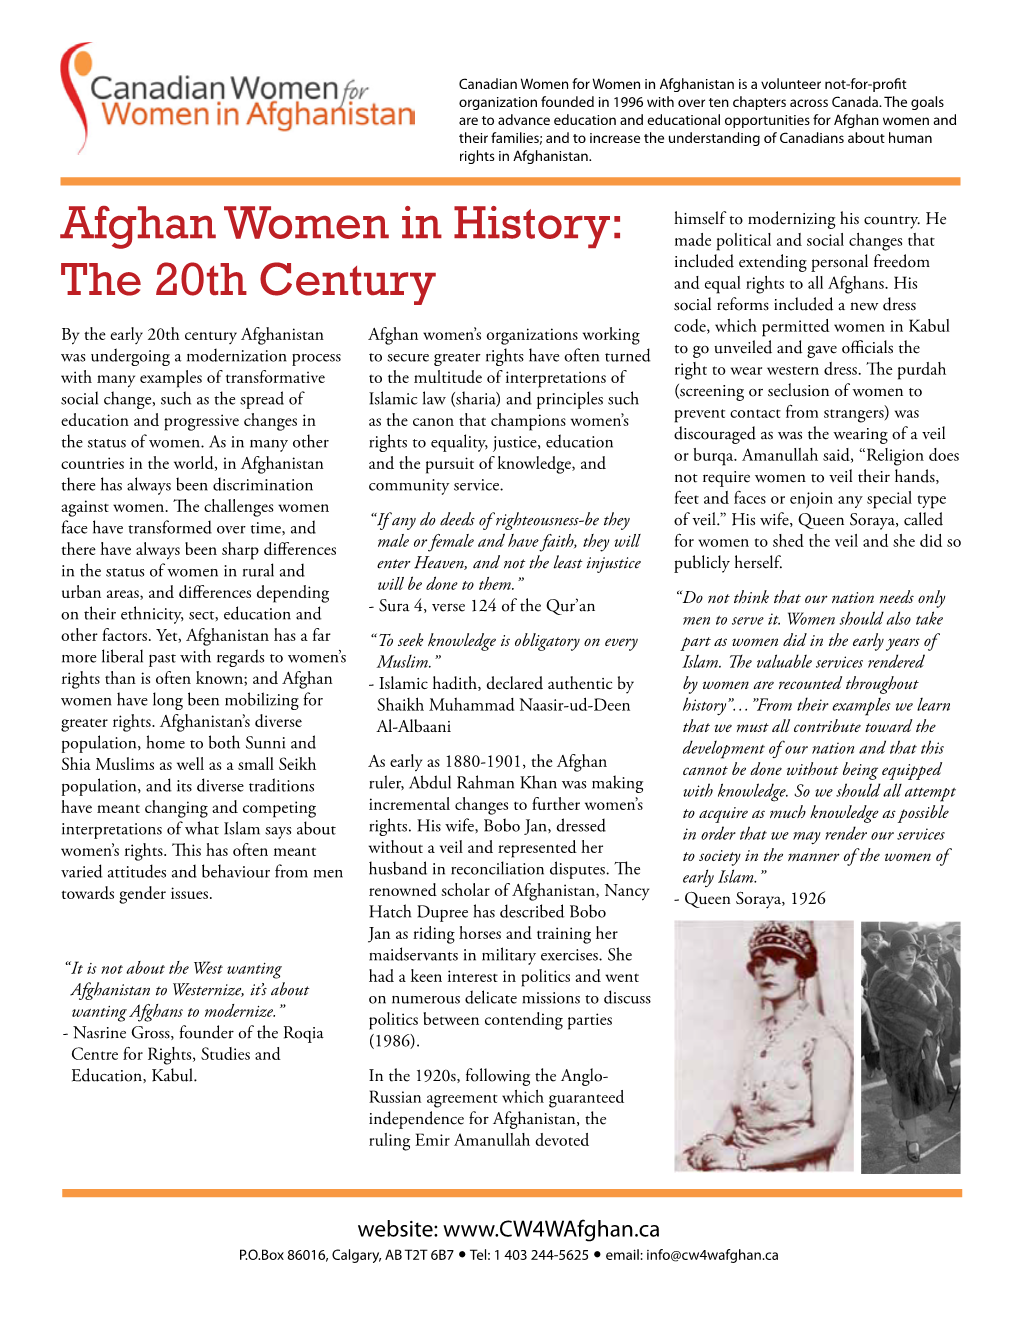 Afghan Women in History: the 20Th Century